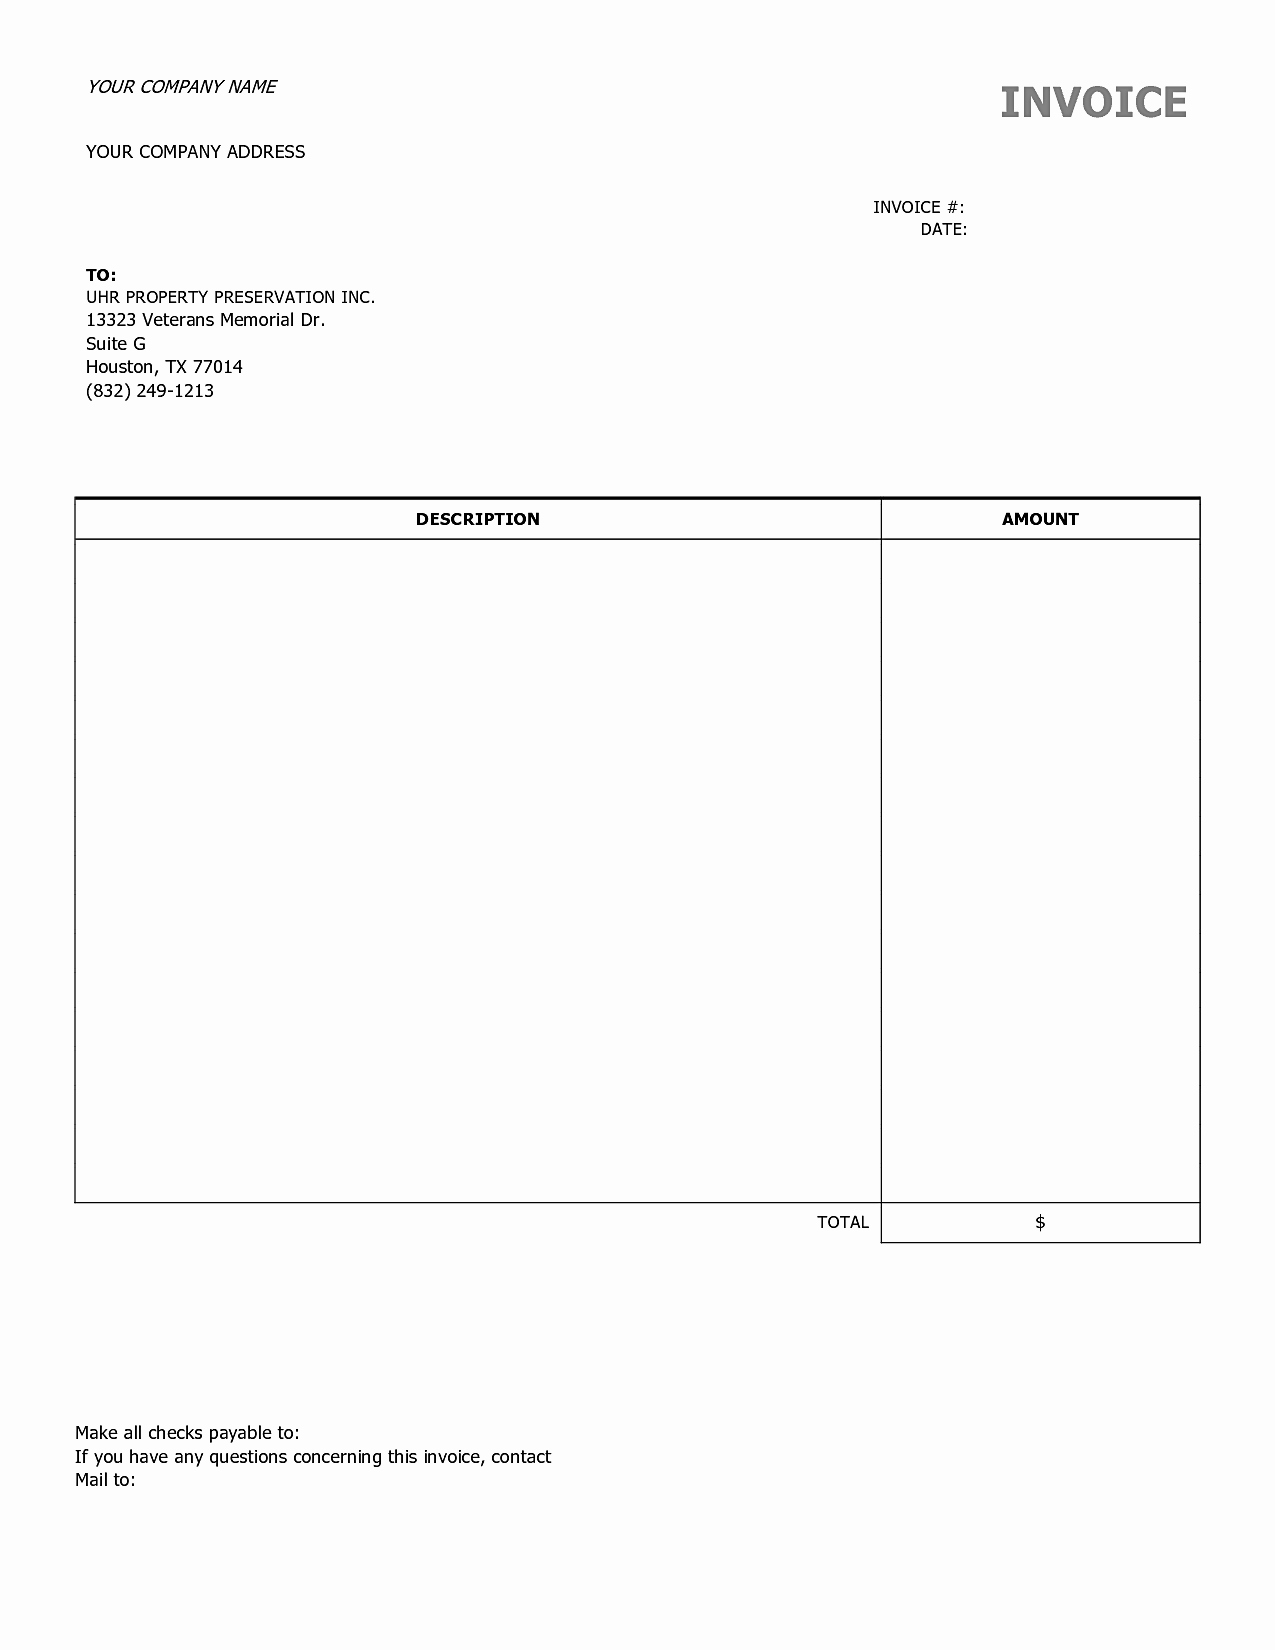 Blank Invoice Template Free Best Of Blank Invoices to Print Mughals